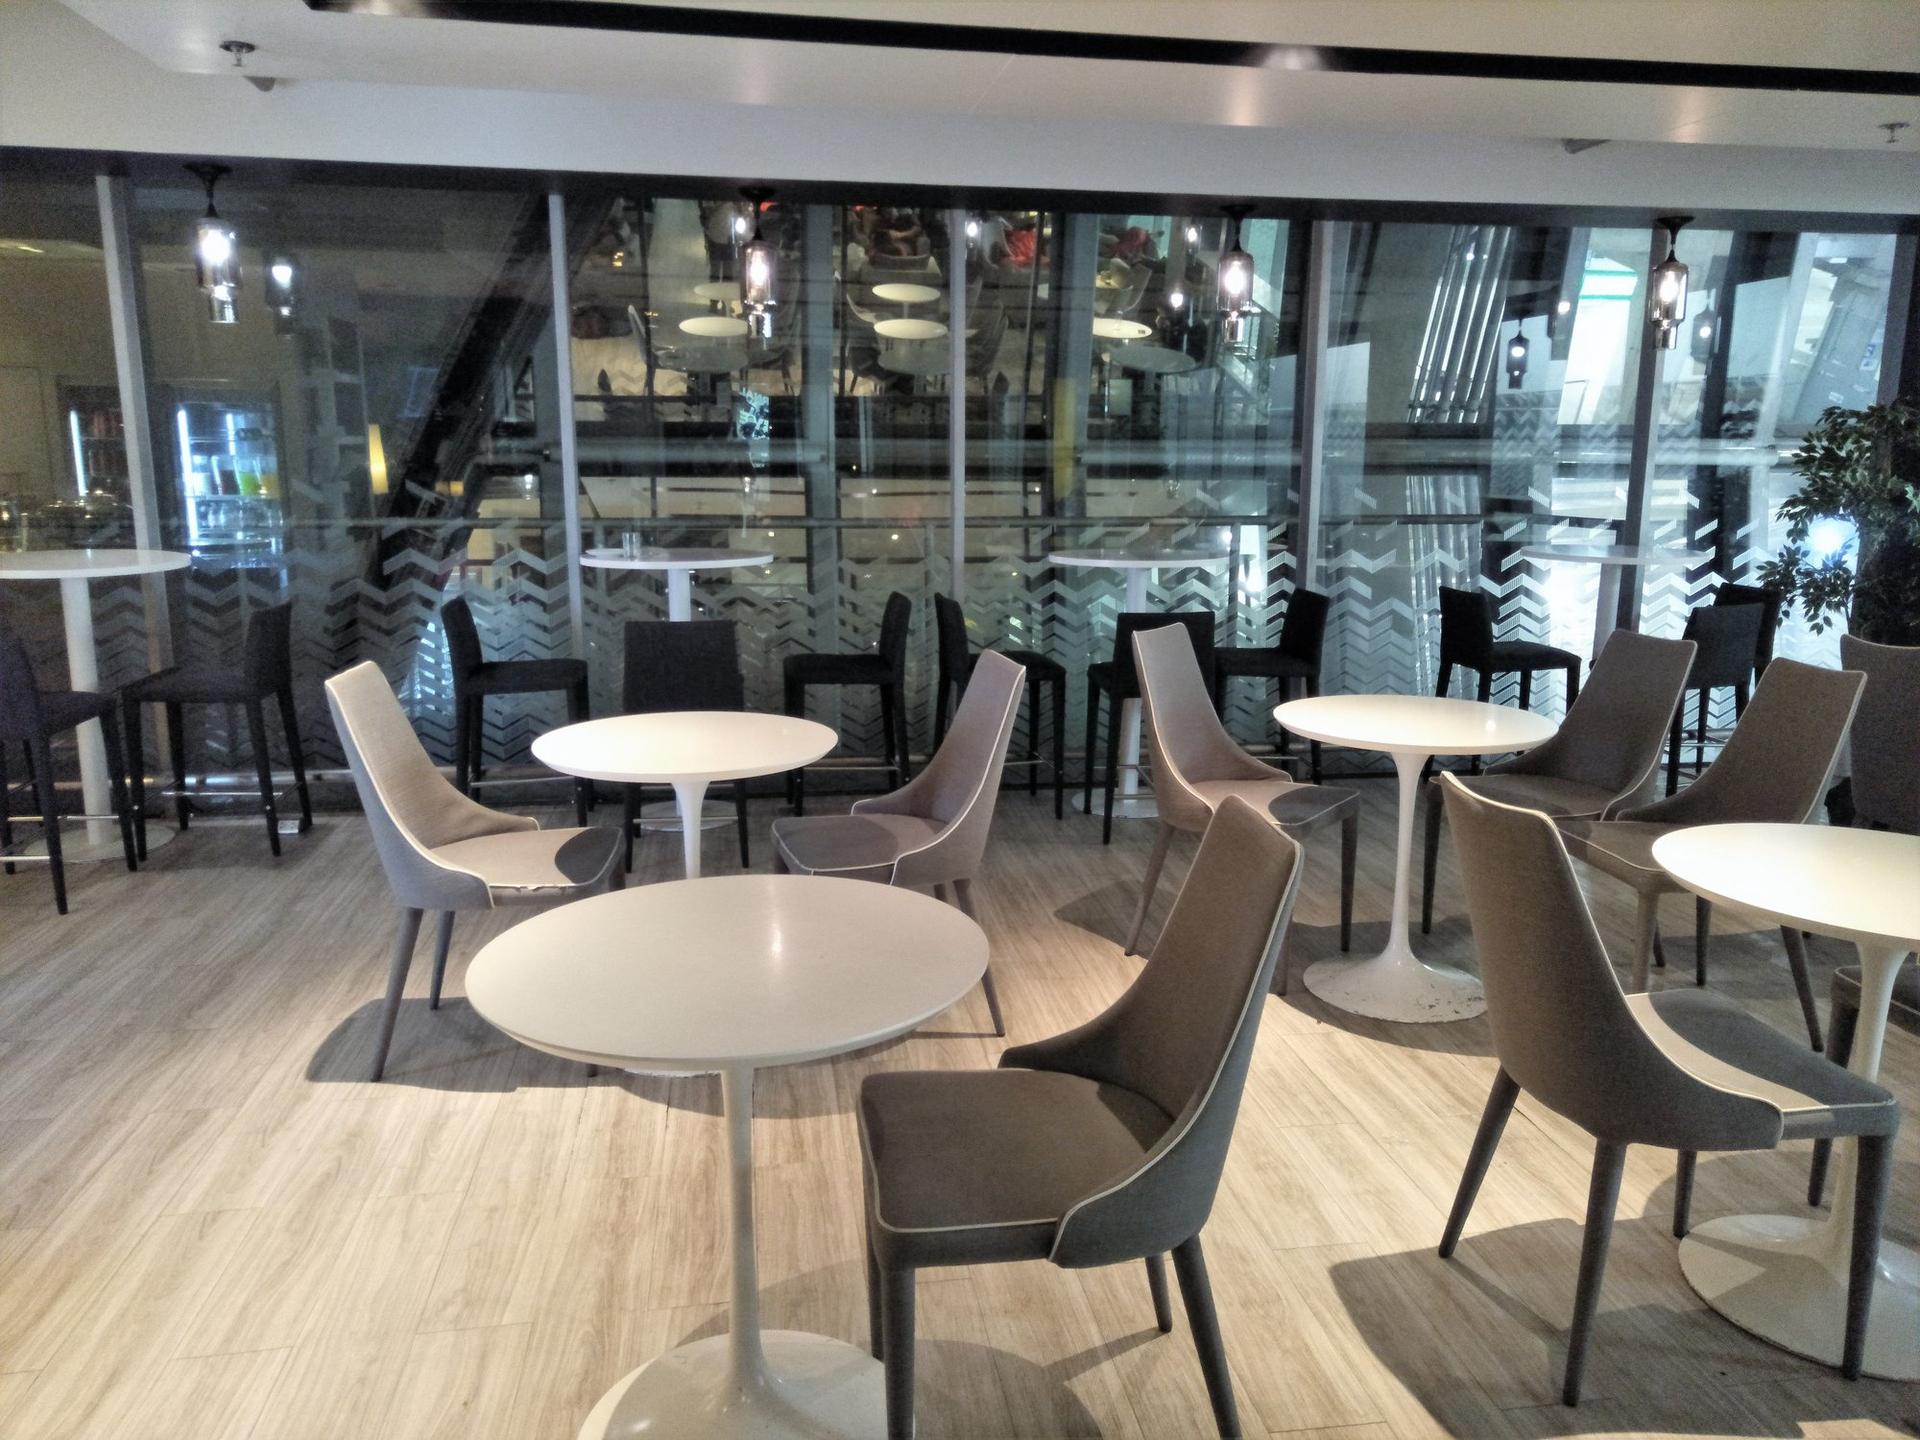 Miracle Business Class Lounge image 20 of 26